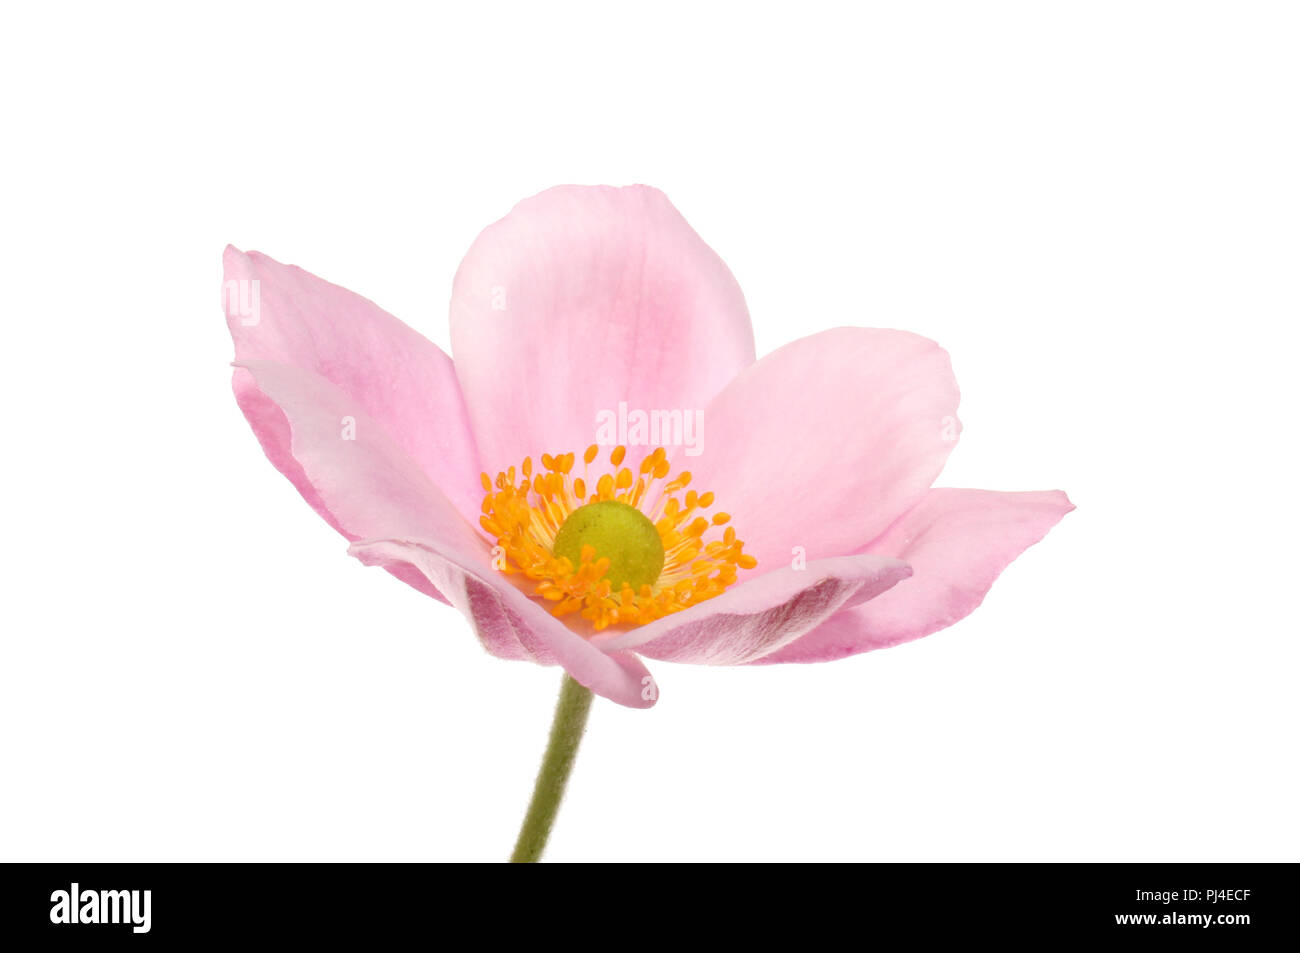 Anémone japonaise rose flower isolated on white Banque D'Images